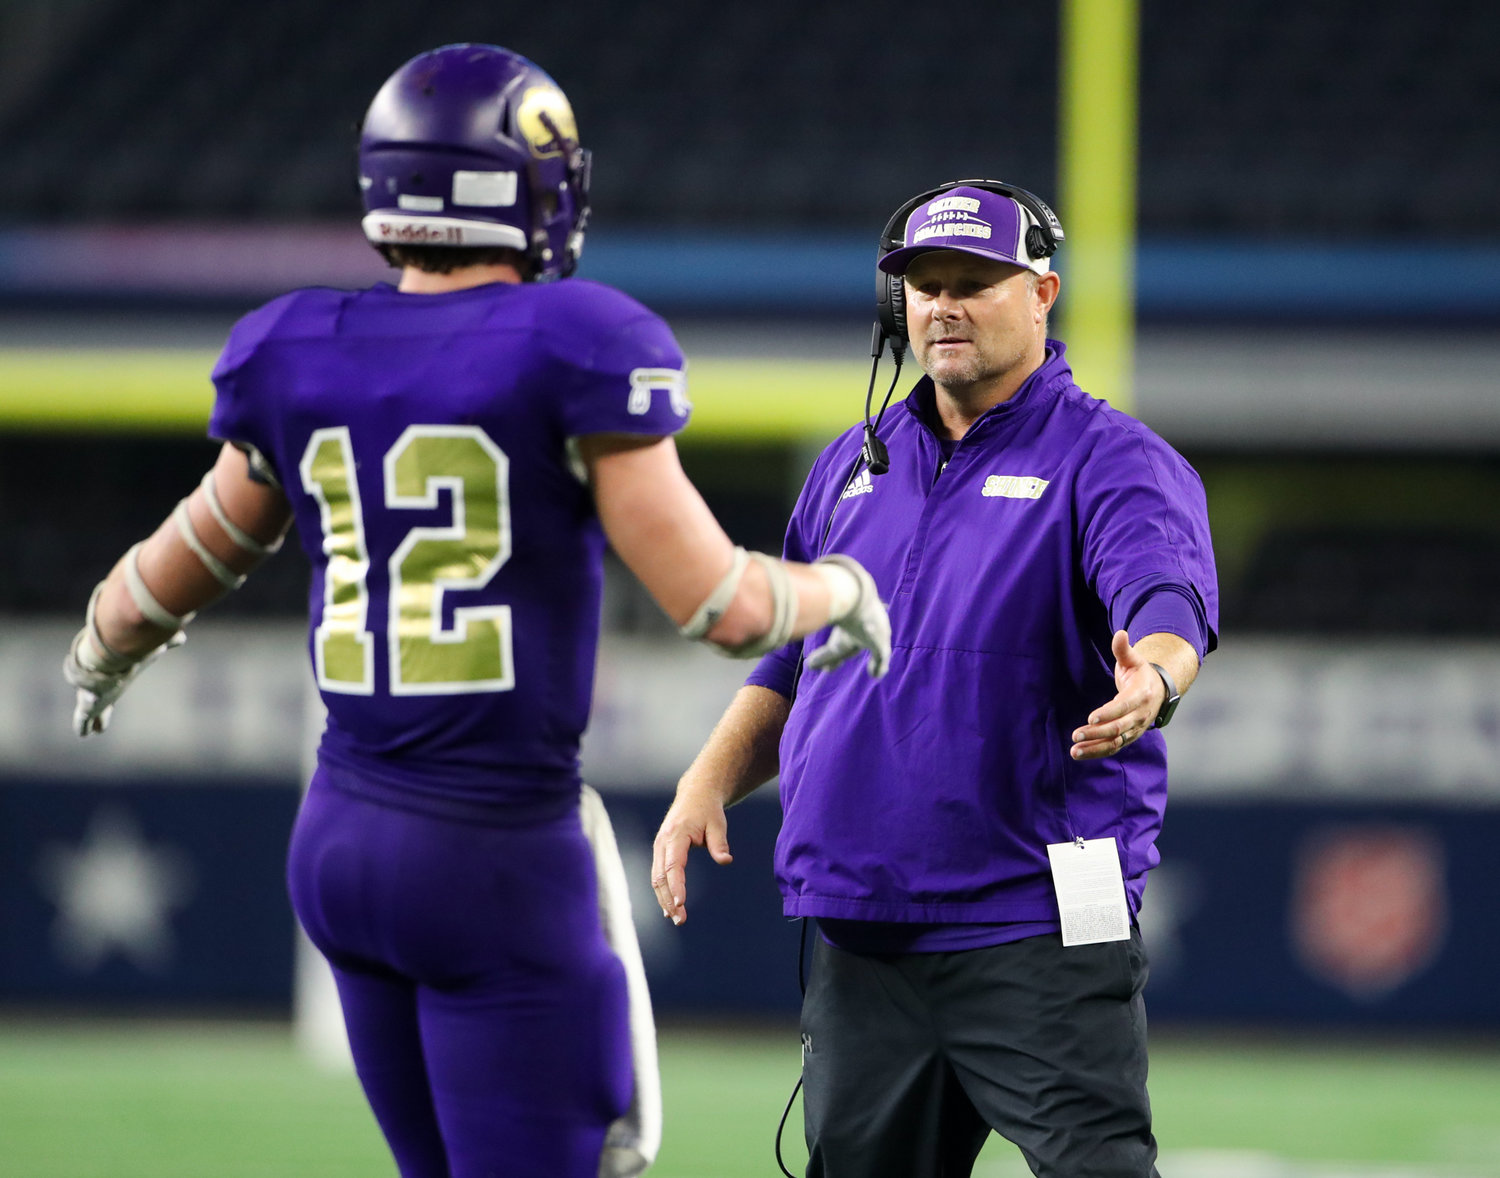 Shiner Comanches head coach Daniel Boedeker congratulates senior Tyler Bishop (12) after a touchdown during the Class 2A Division I state football championship game between Shiner and Hawley on December 15, 2021 in Arlington, Texas.